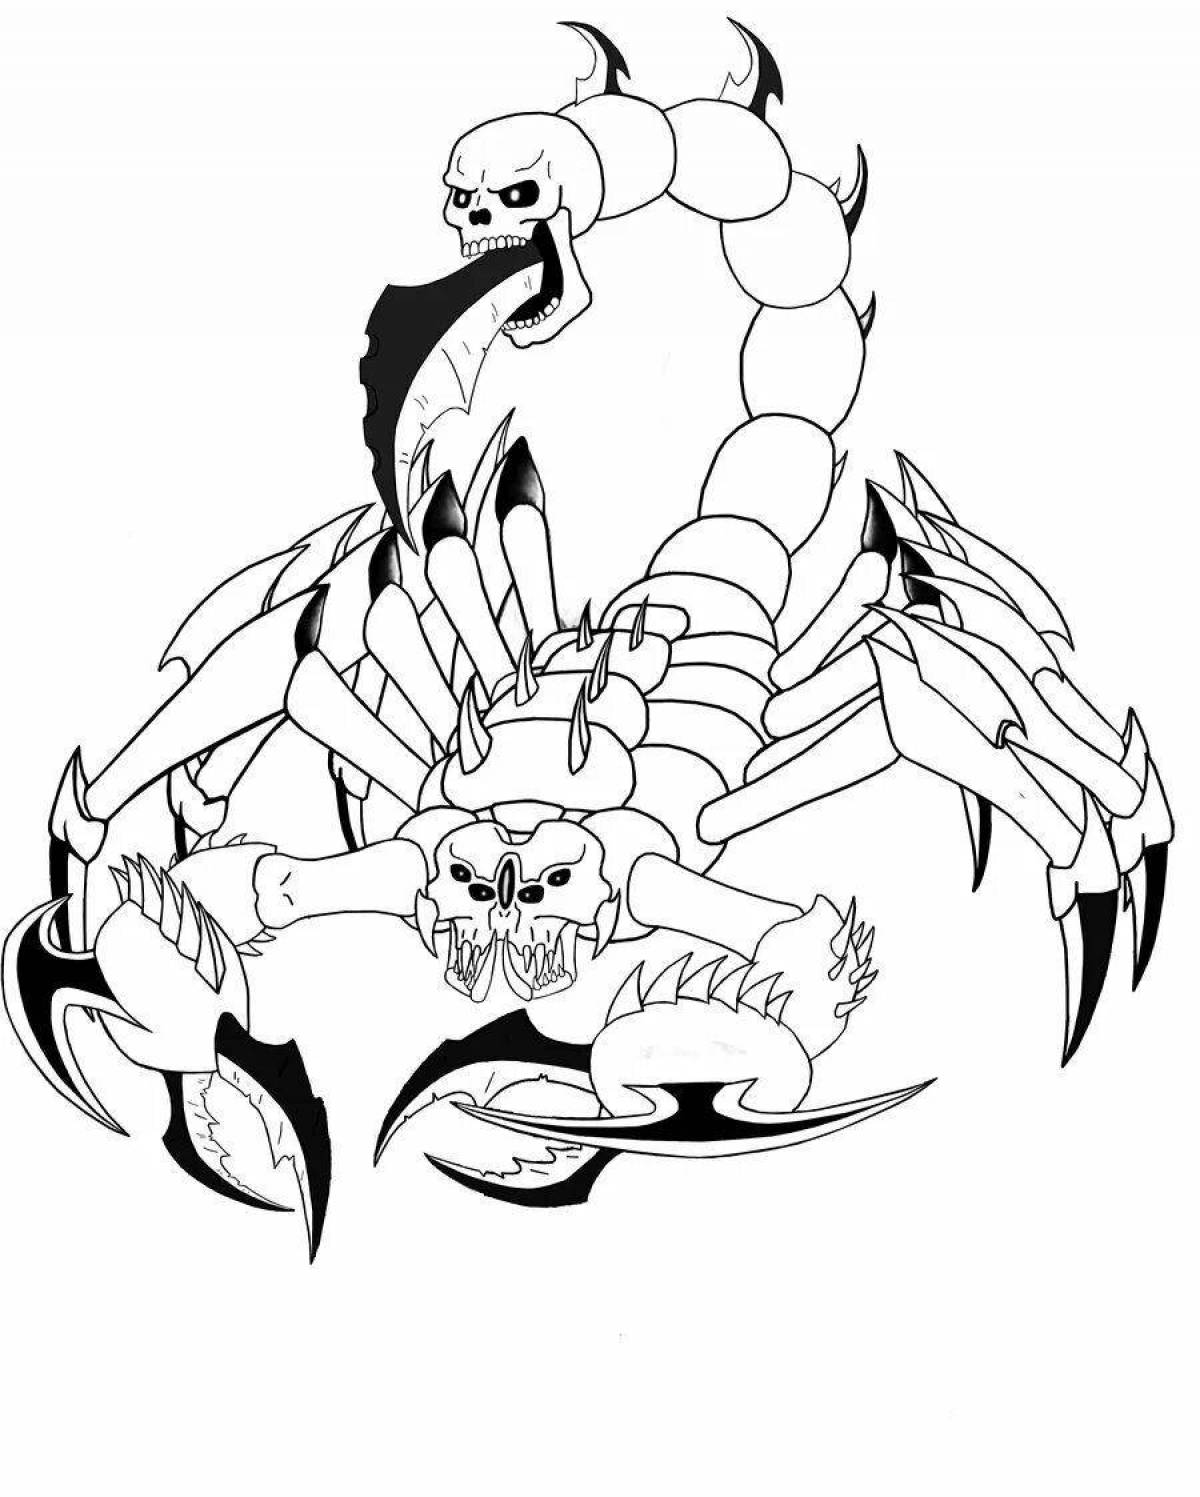 Frightening scorpion coloring page